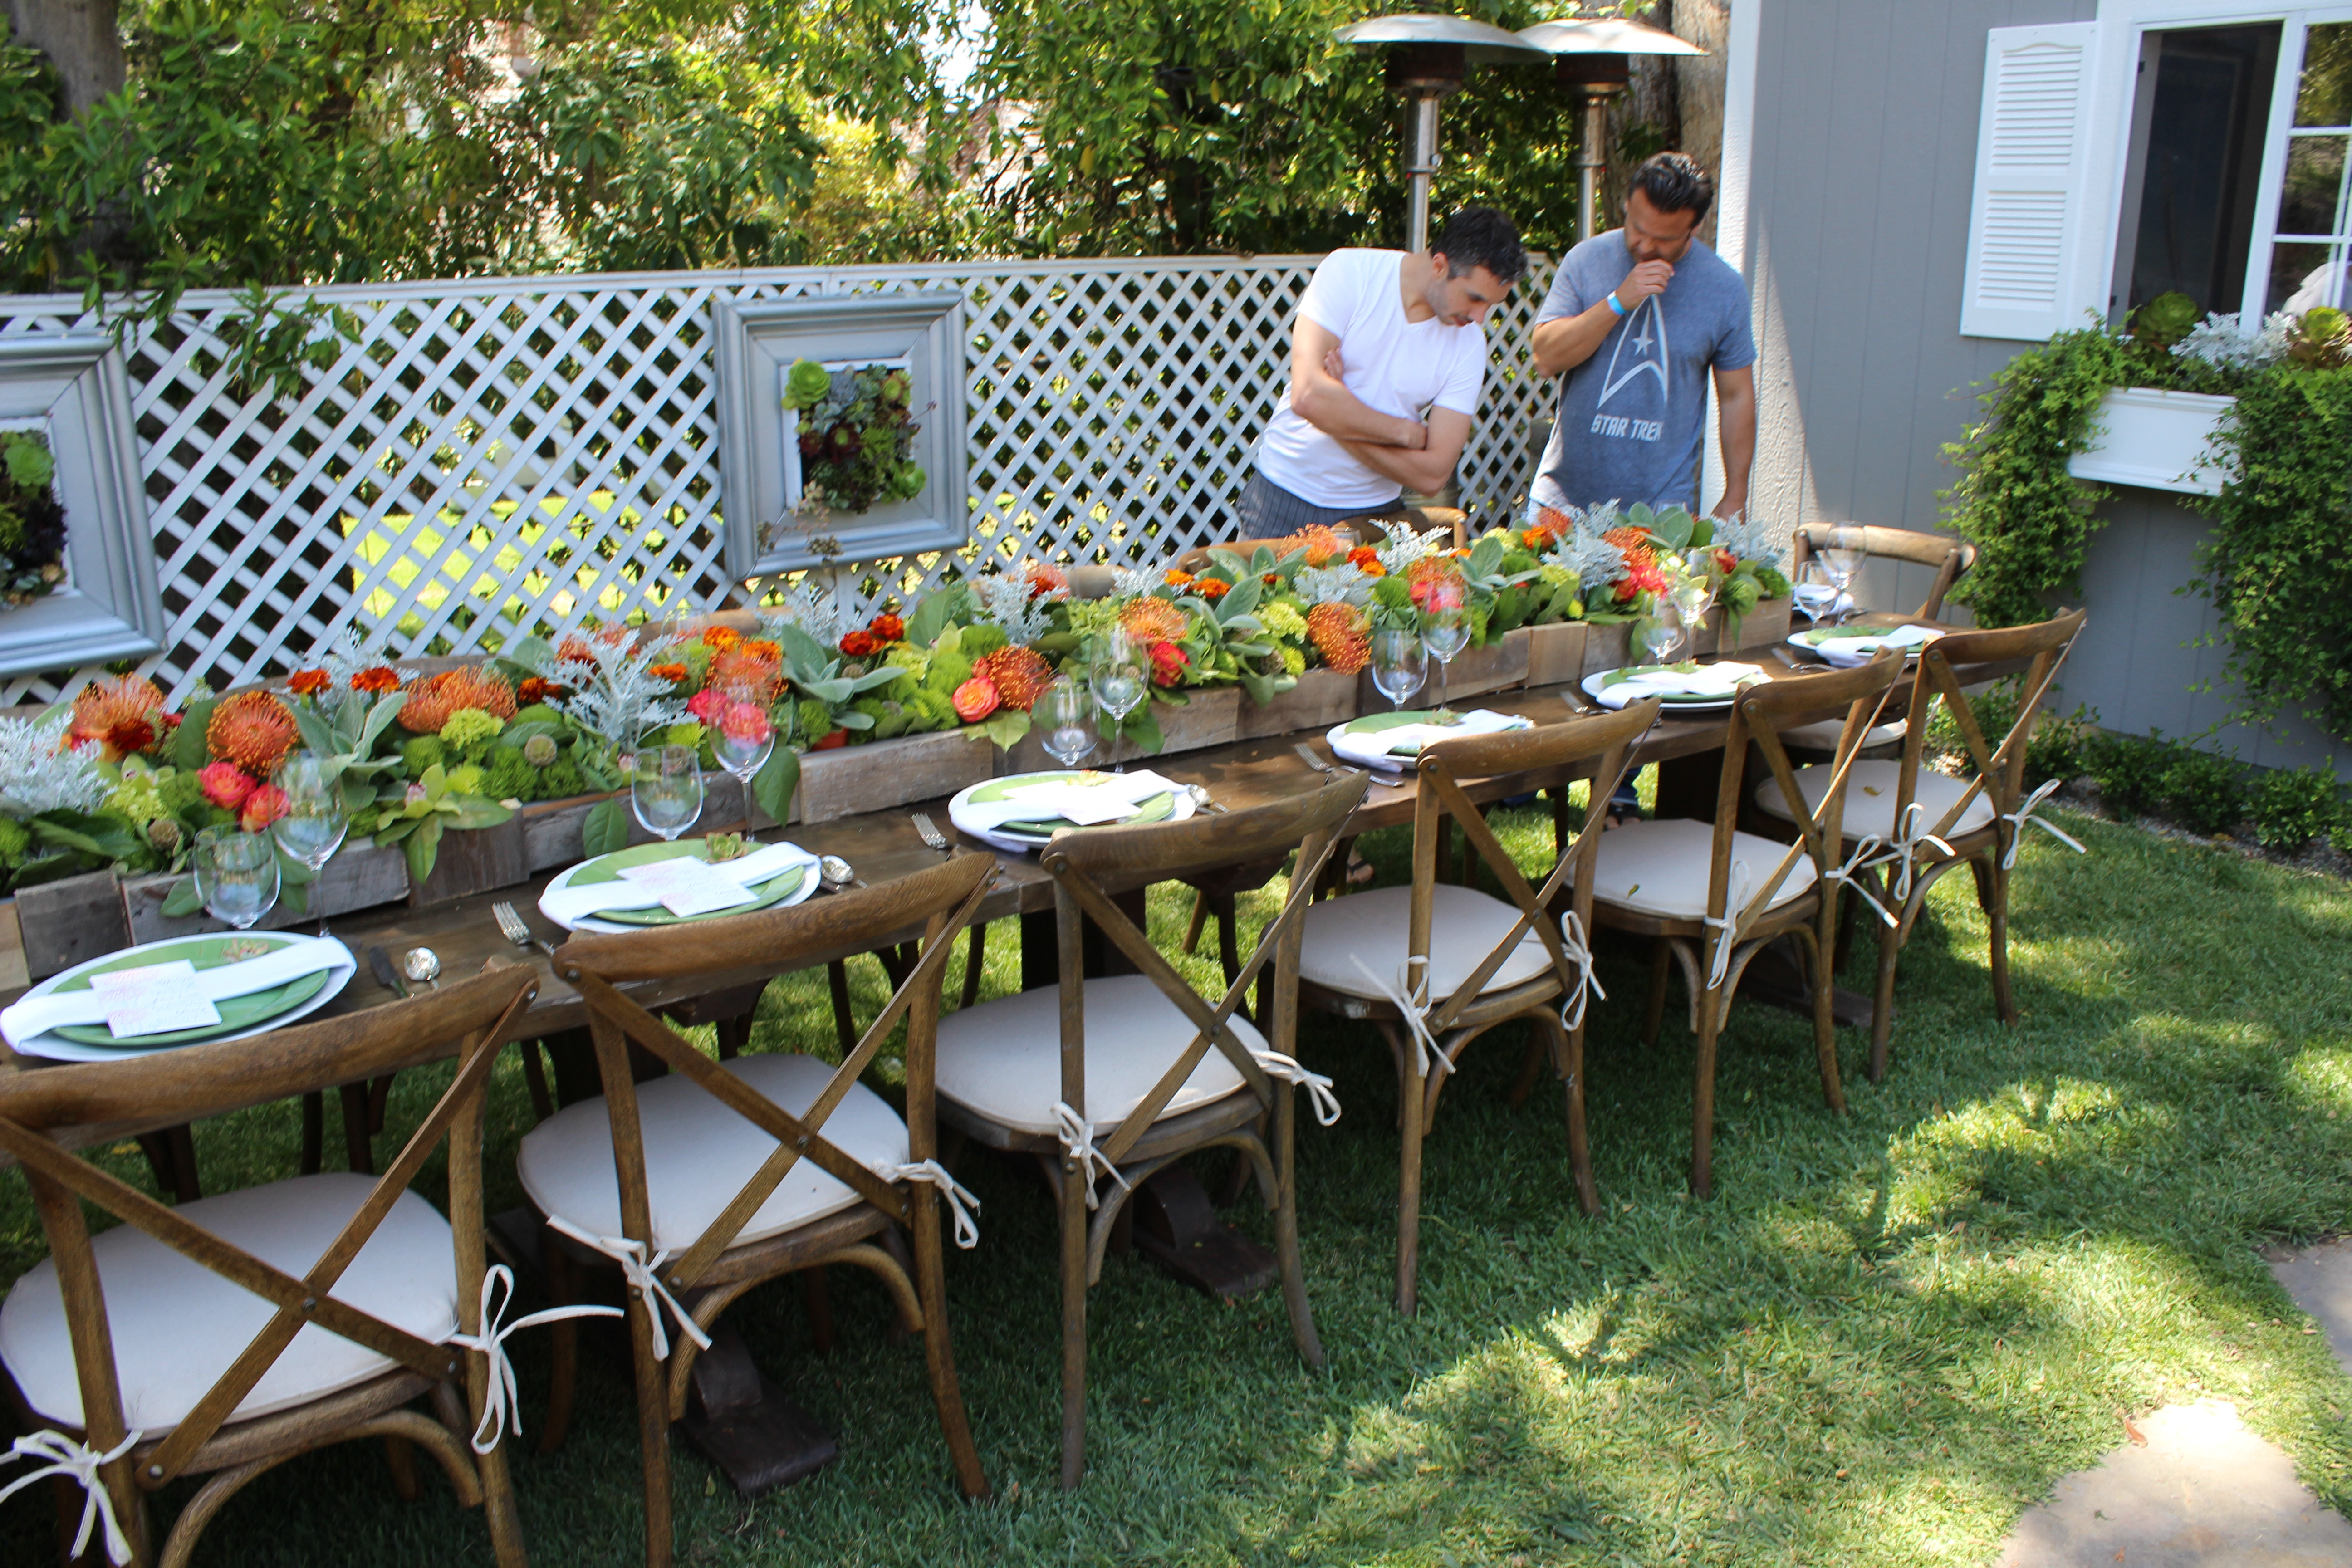 Backyard Party Decoration Ideas For Adults
 Plan an Outdoor Garden Party